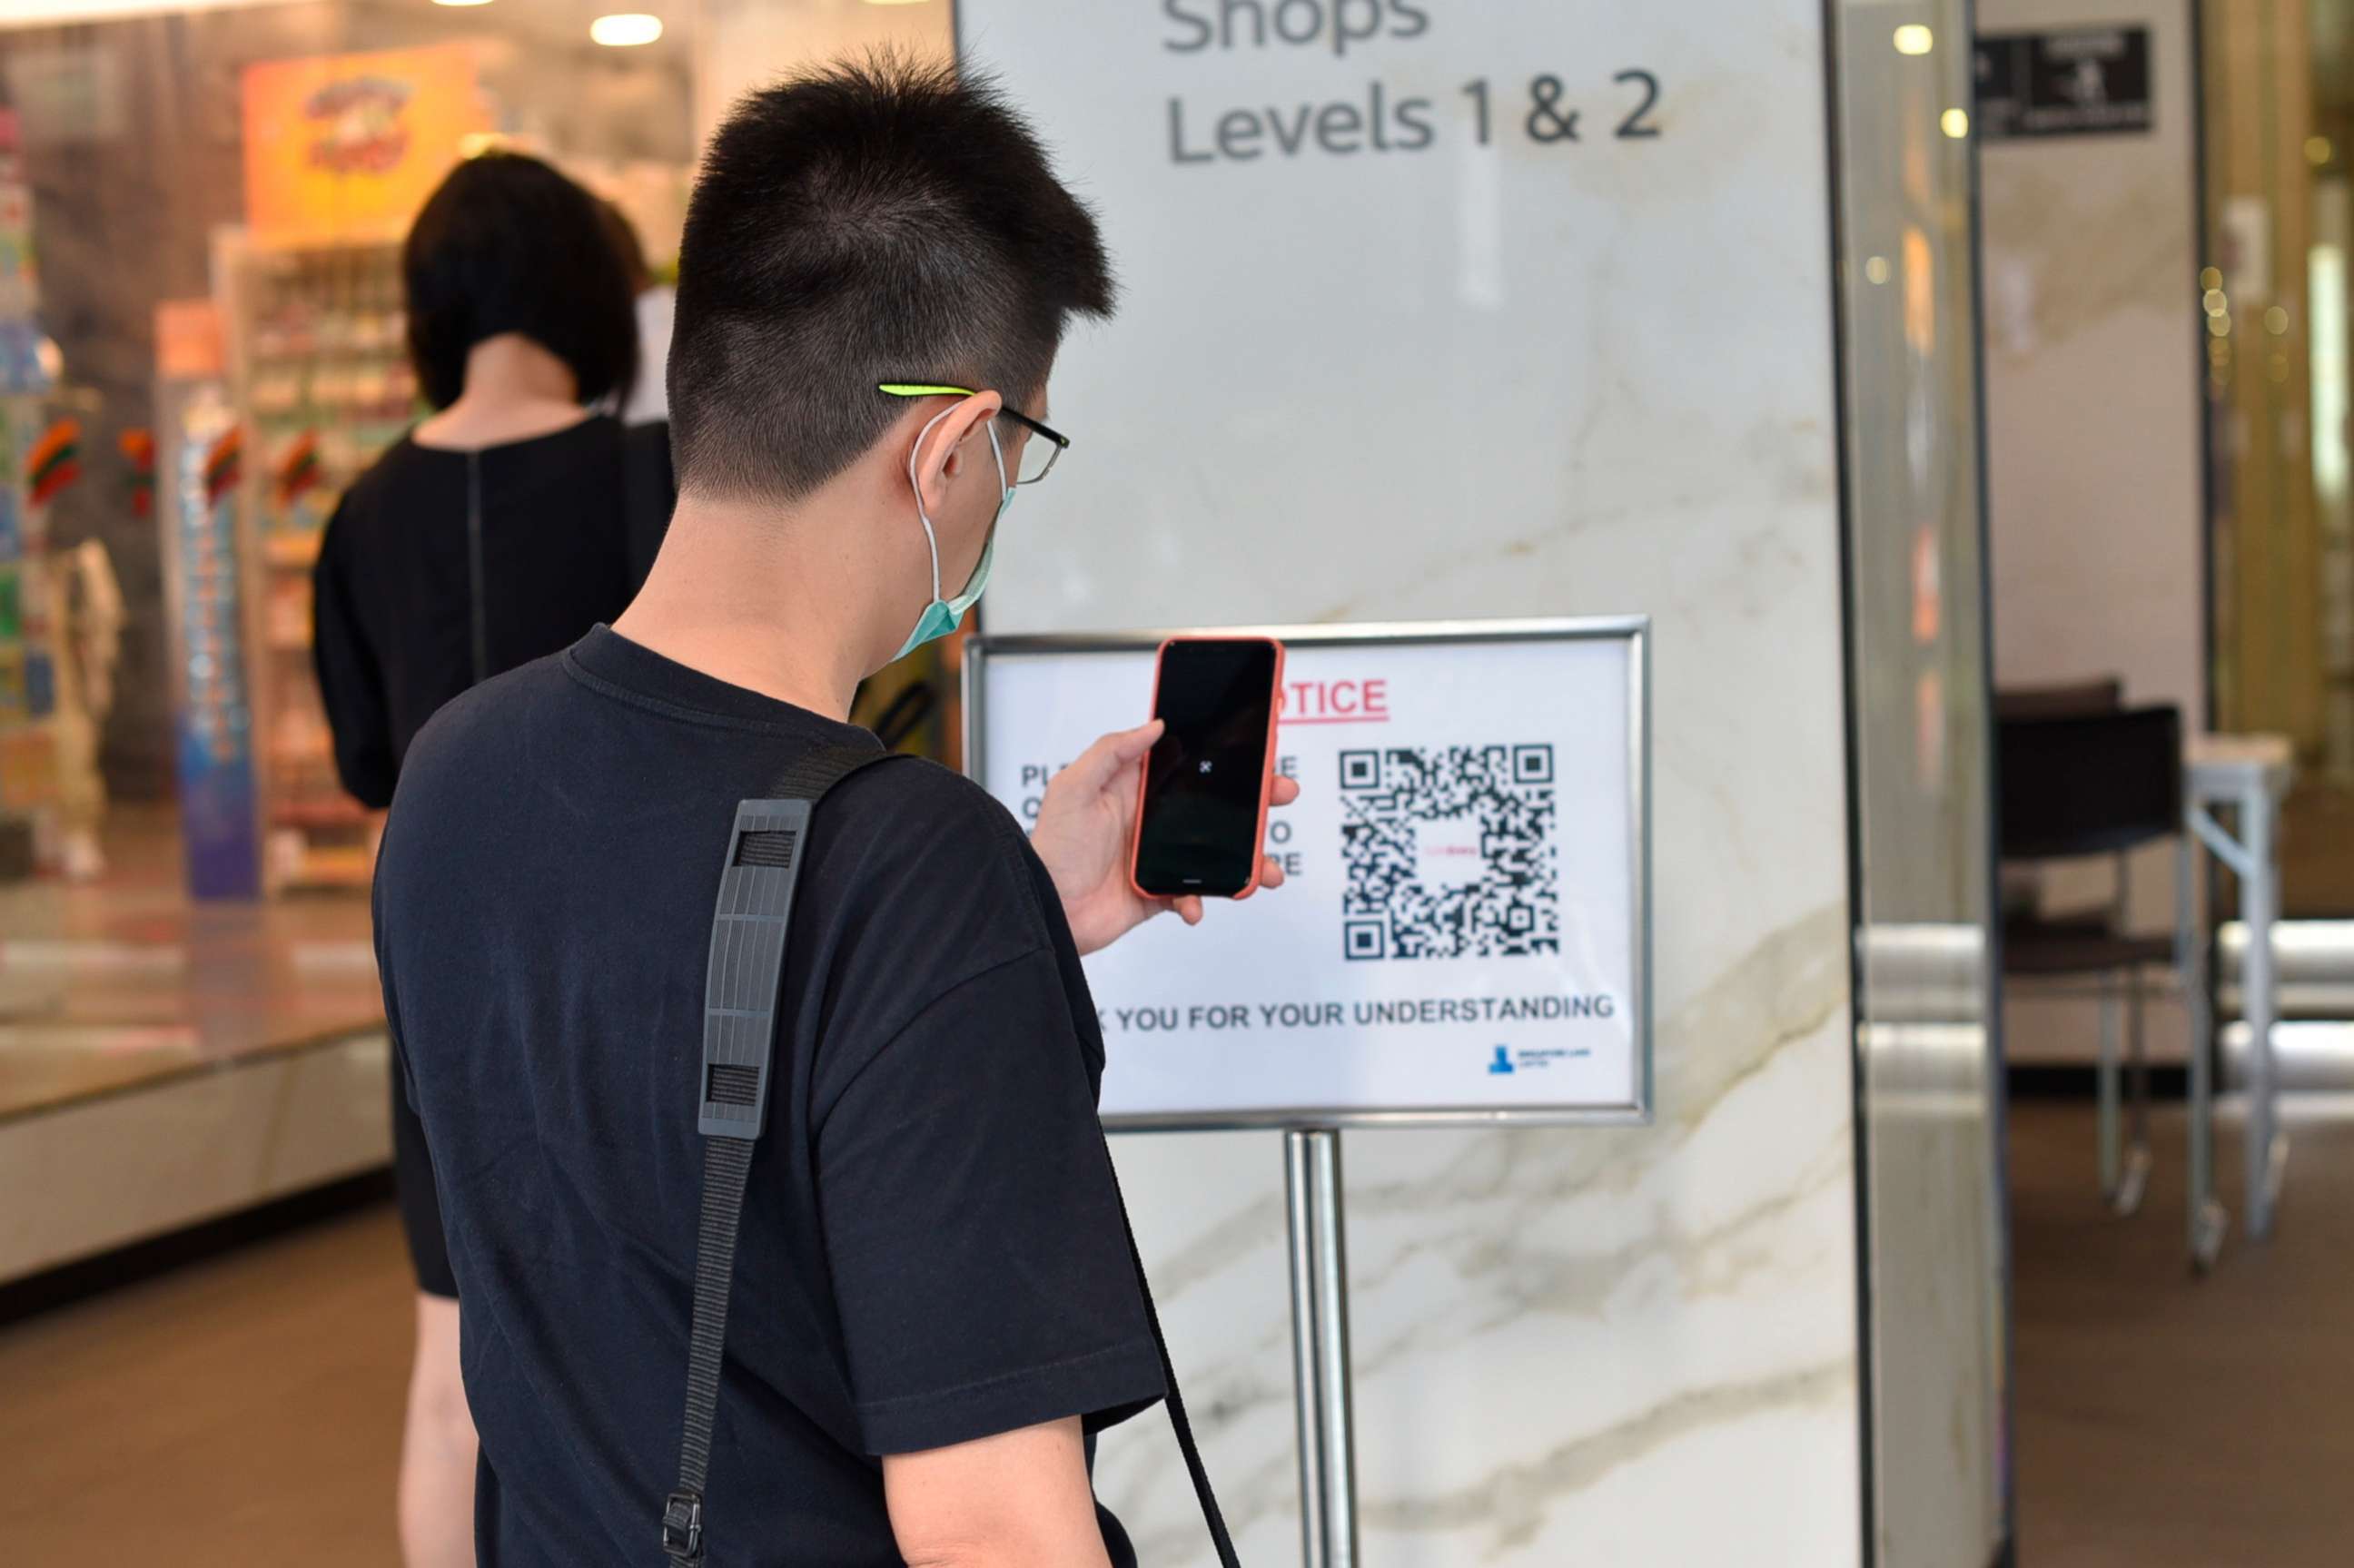 PHOTO: A man scans a QR code before entering a building in Singapore Tuesday, June 2, 2020. Singapore reopened 75% of its economy Tuesday, as part of a three-phase controlled approach to end a virus lockdown since early April.